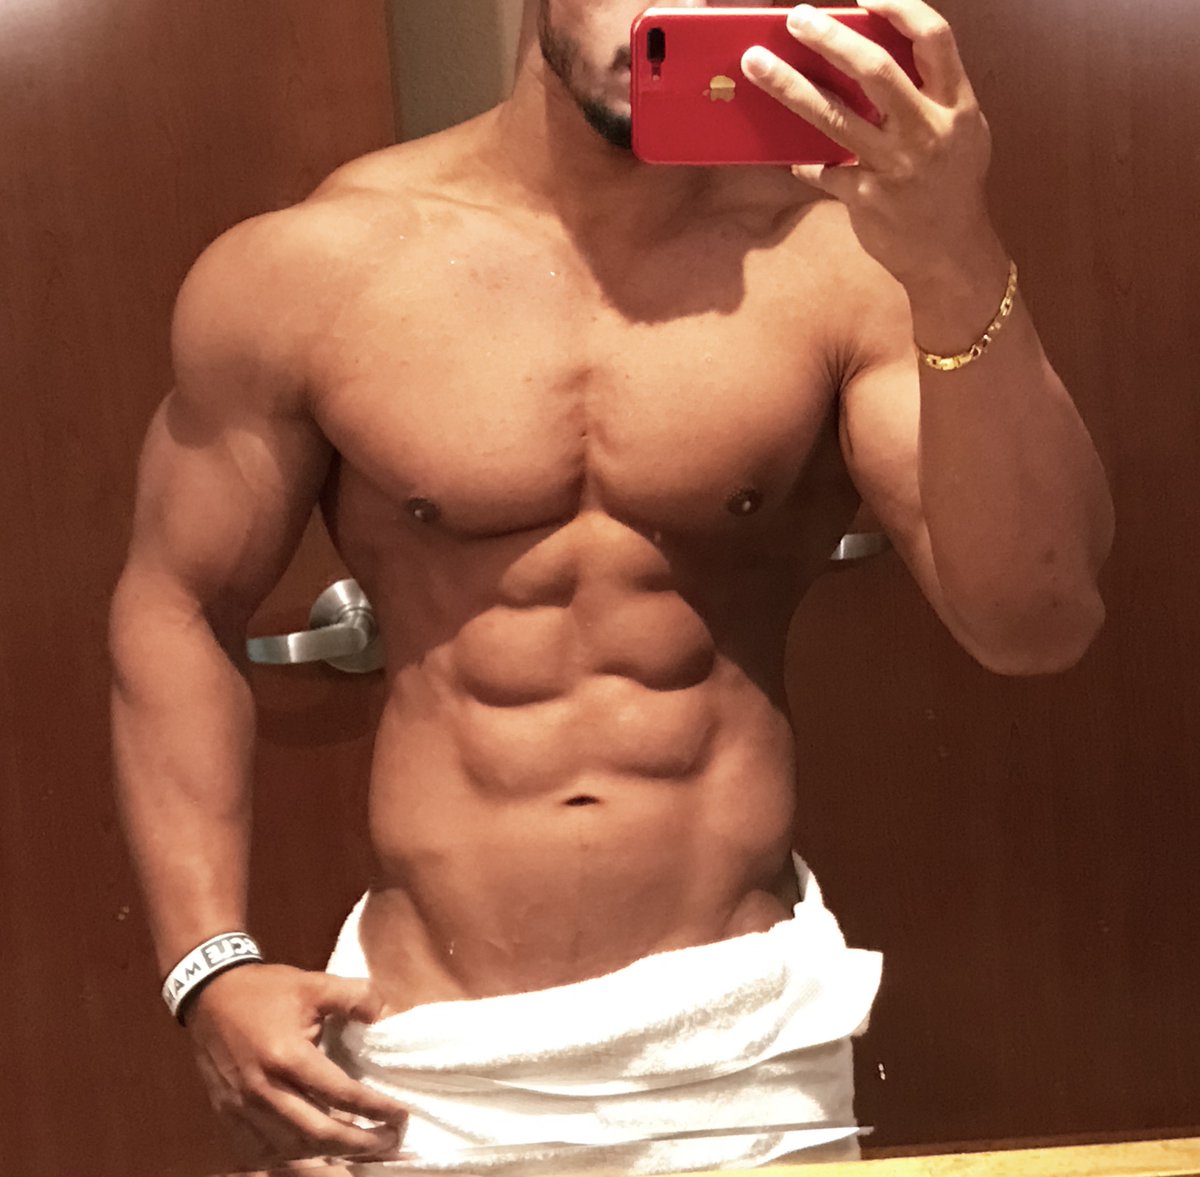 Good & Happy Morning vibes #Twitter Family !!🔥❤️‍🔥💪🏽 #happytoweltuesday 

#PranavRaj #pro #classicphysique #worldchamp #showstopper #MissionImpossible #MuscleModel #selfie #sixpackabs